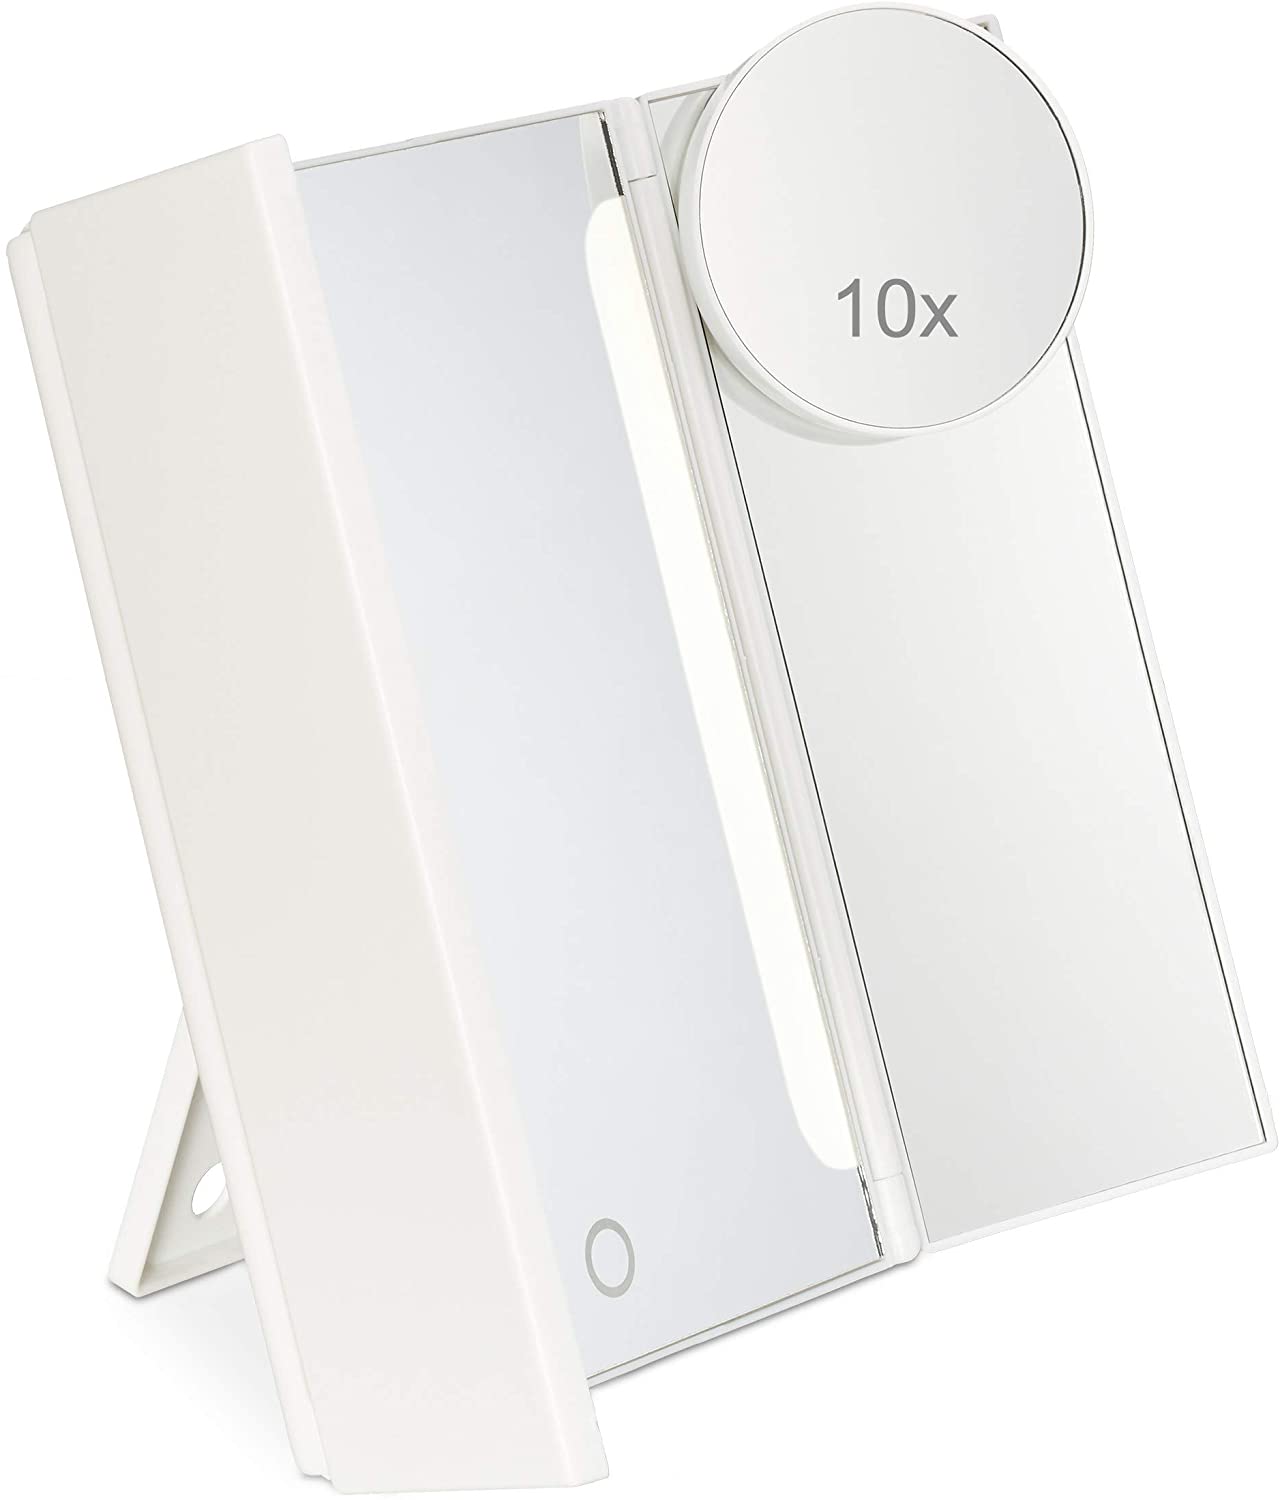 Relaxdays Make-Up Mirror With Light, 3 Sides Foldable Illuminated Cosmetic 